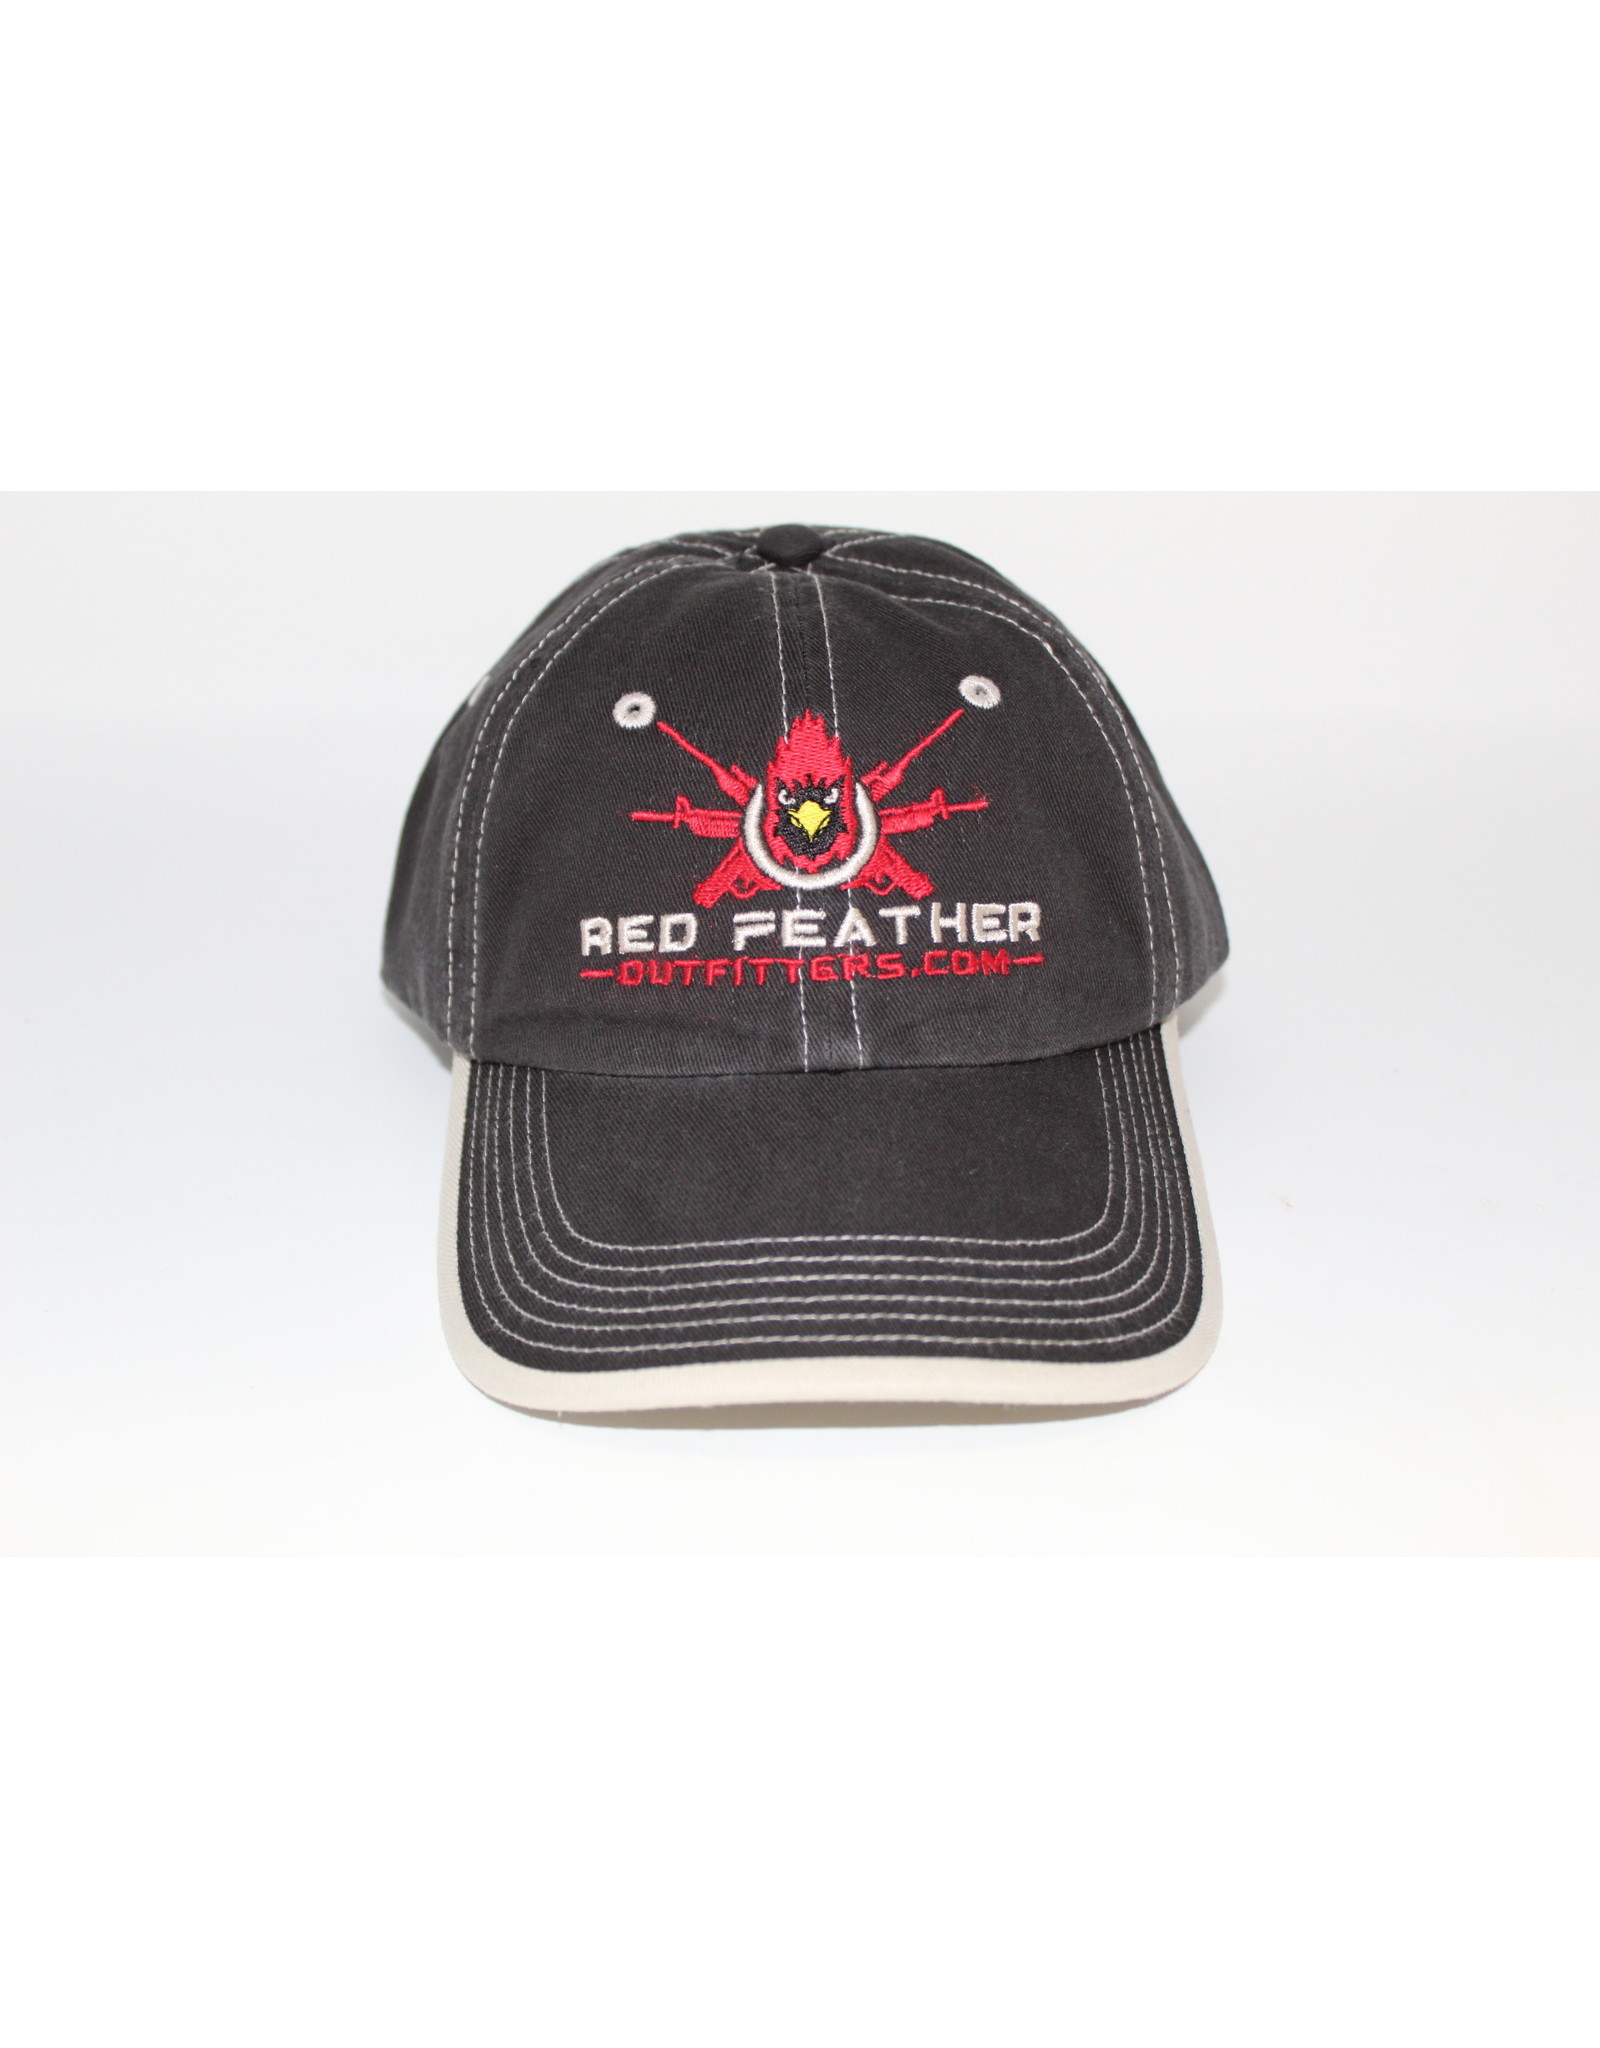 Red Feather Outfitters Emb. Hat Wash. Black Stone